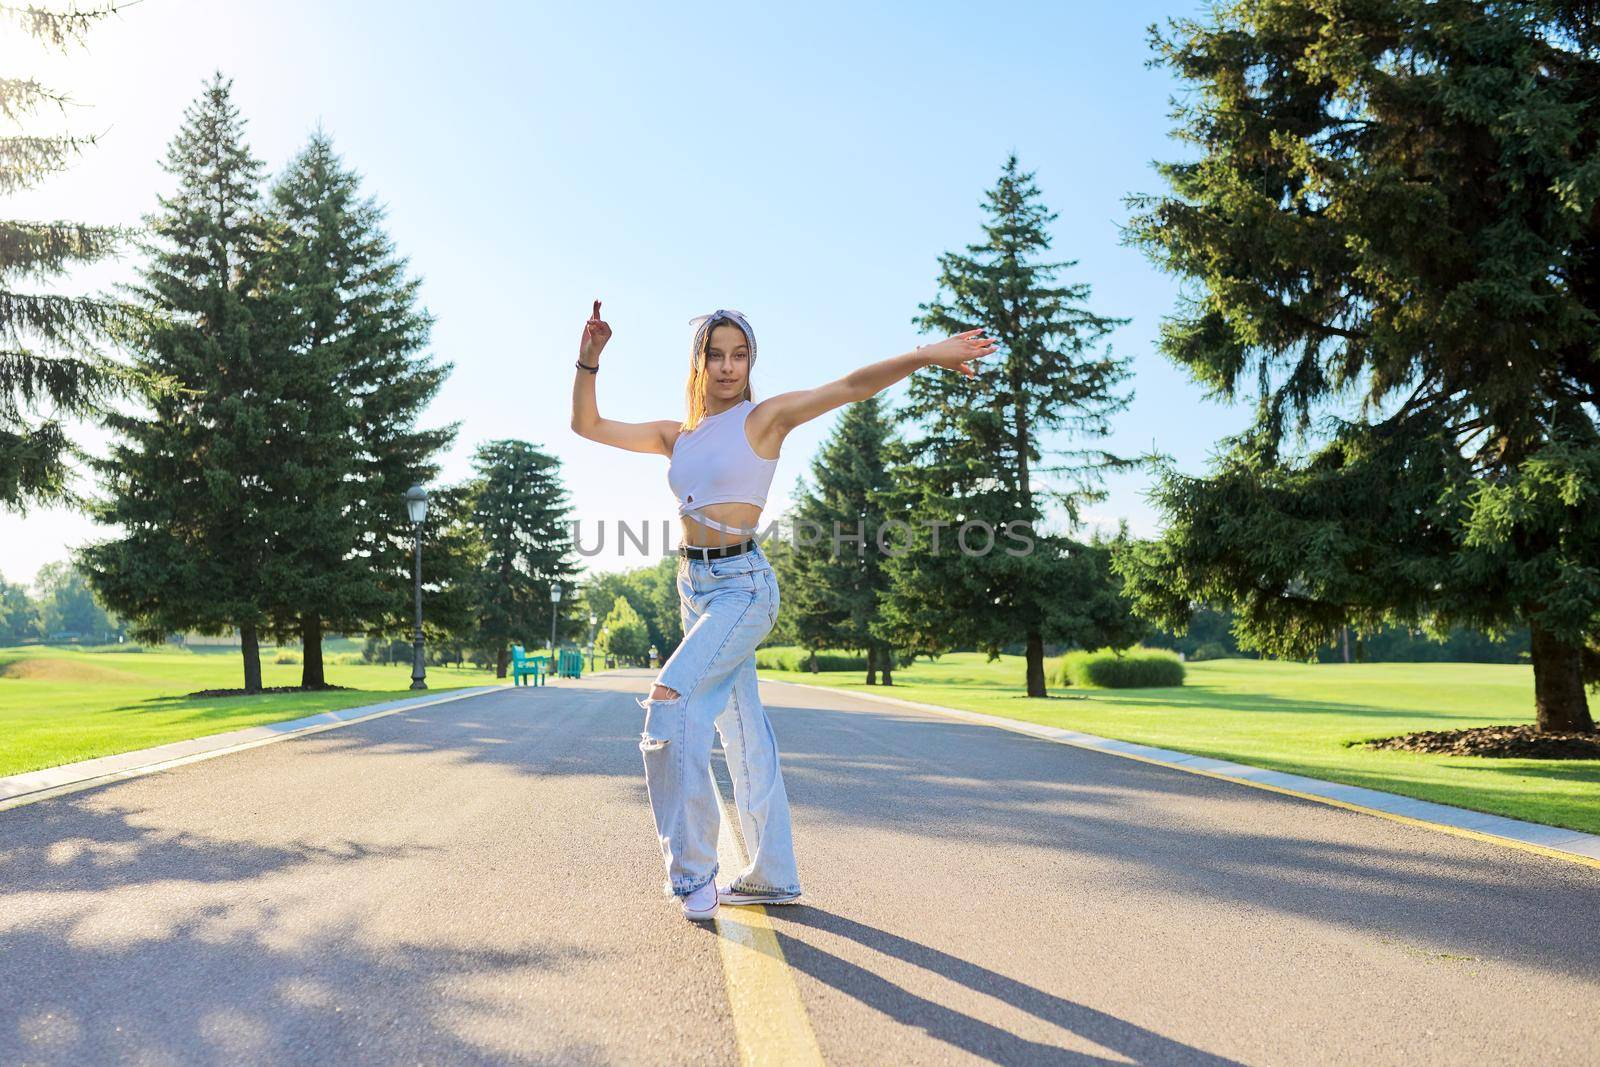 Dancing young female teenager on road in park on sunny summer day. Hipster teen girl in jeans dancing sports street dance. Youth, teens, summer, fashion, street style, lifestyle concept